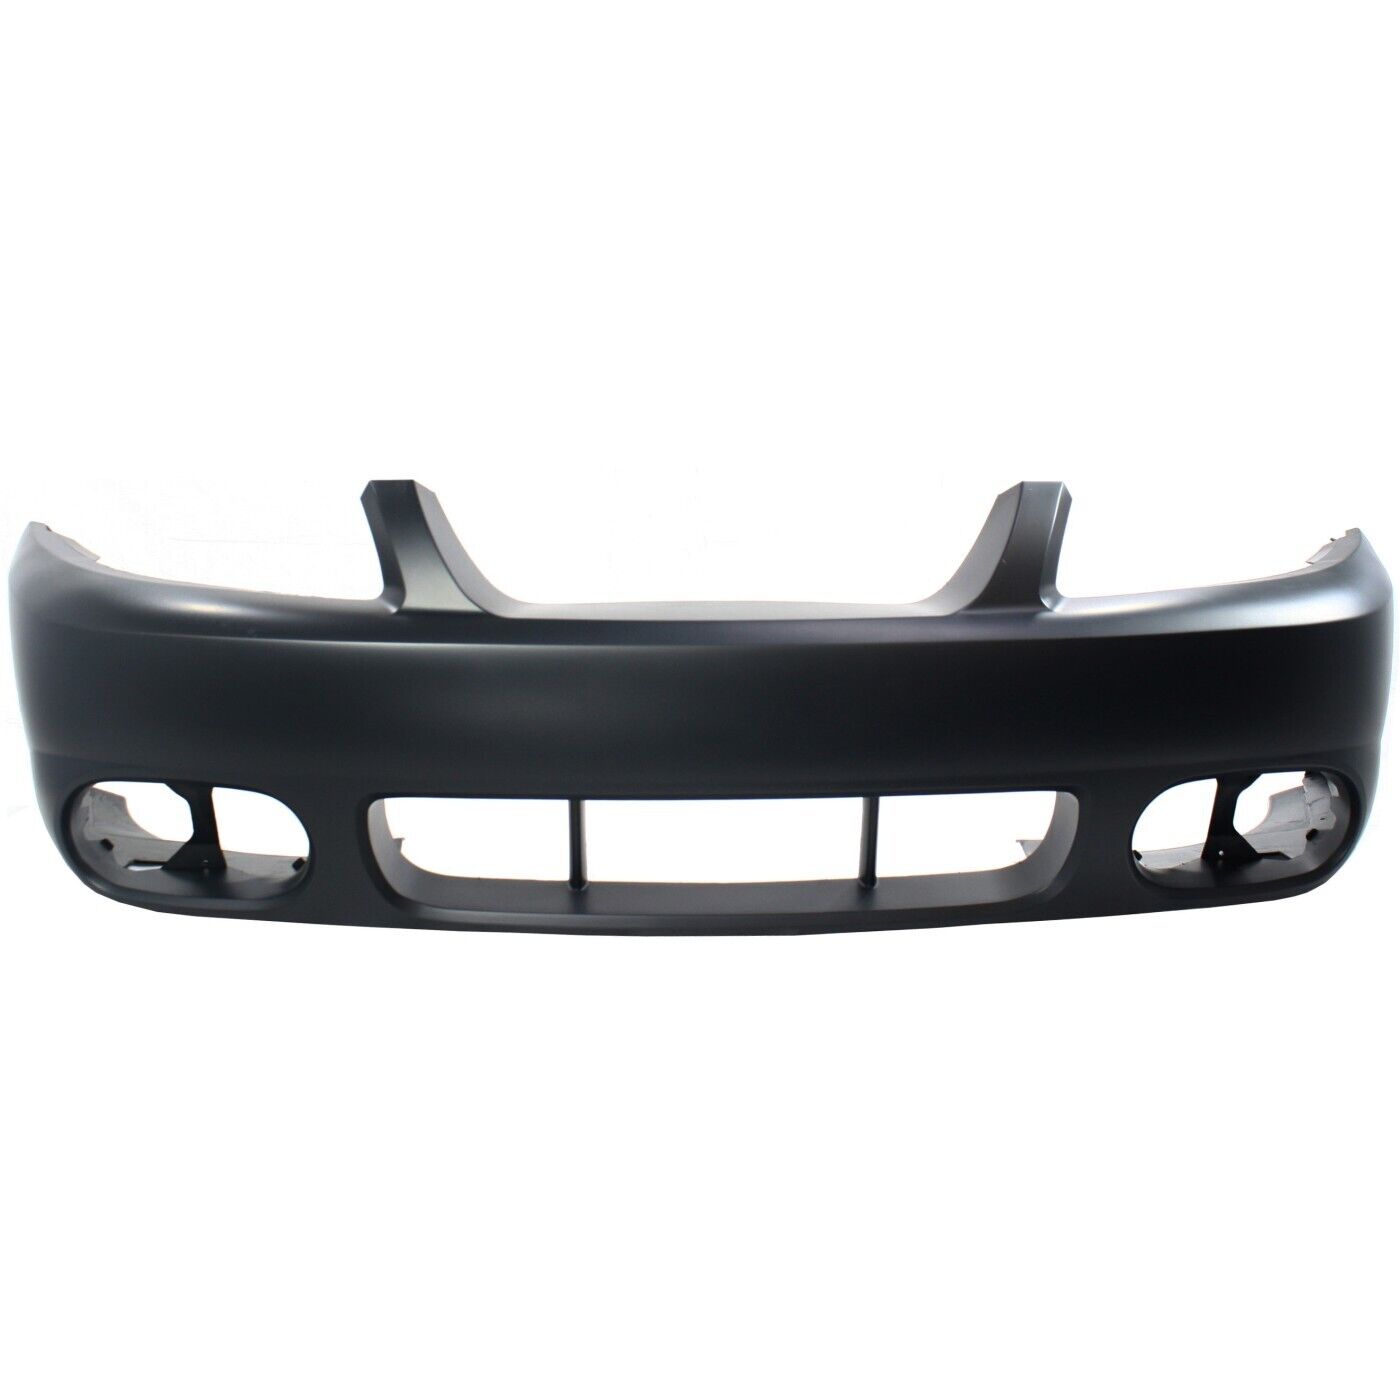 Front Bumper Cover For 2003-2004 Ford Mustang Cobra Primed With Fog Light Holes